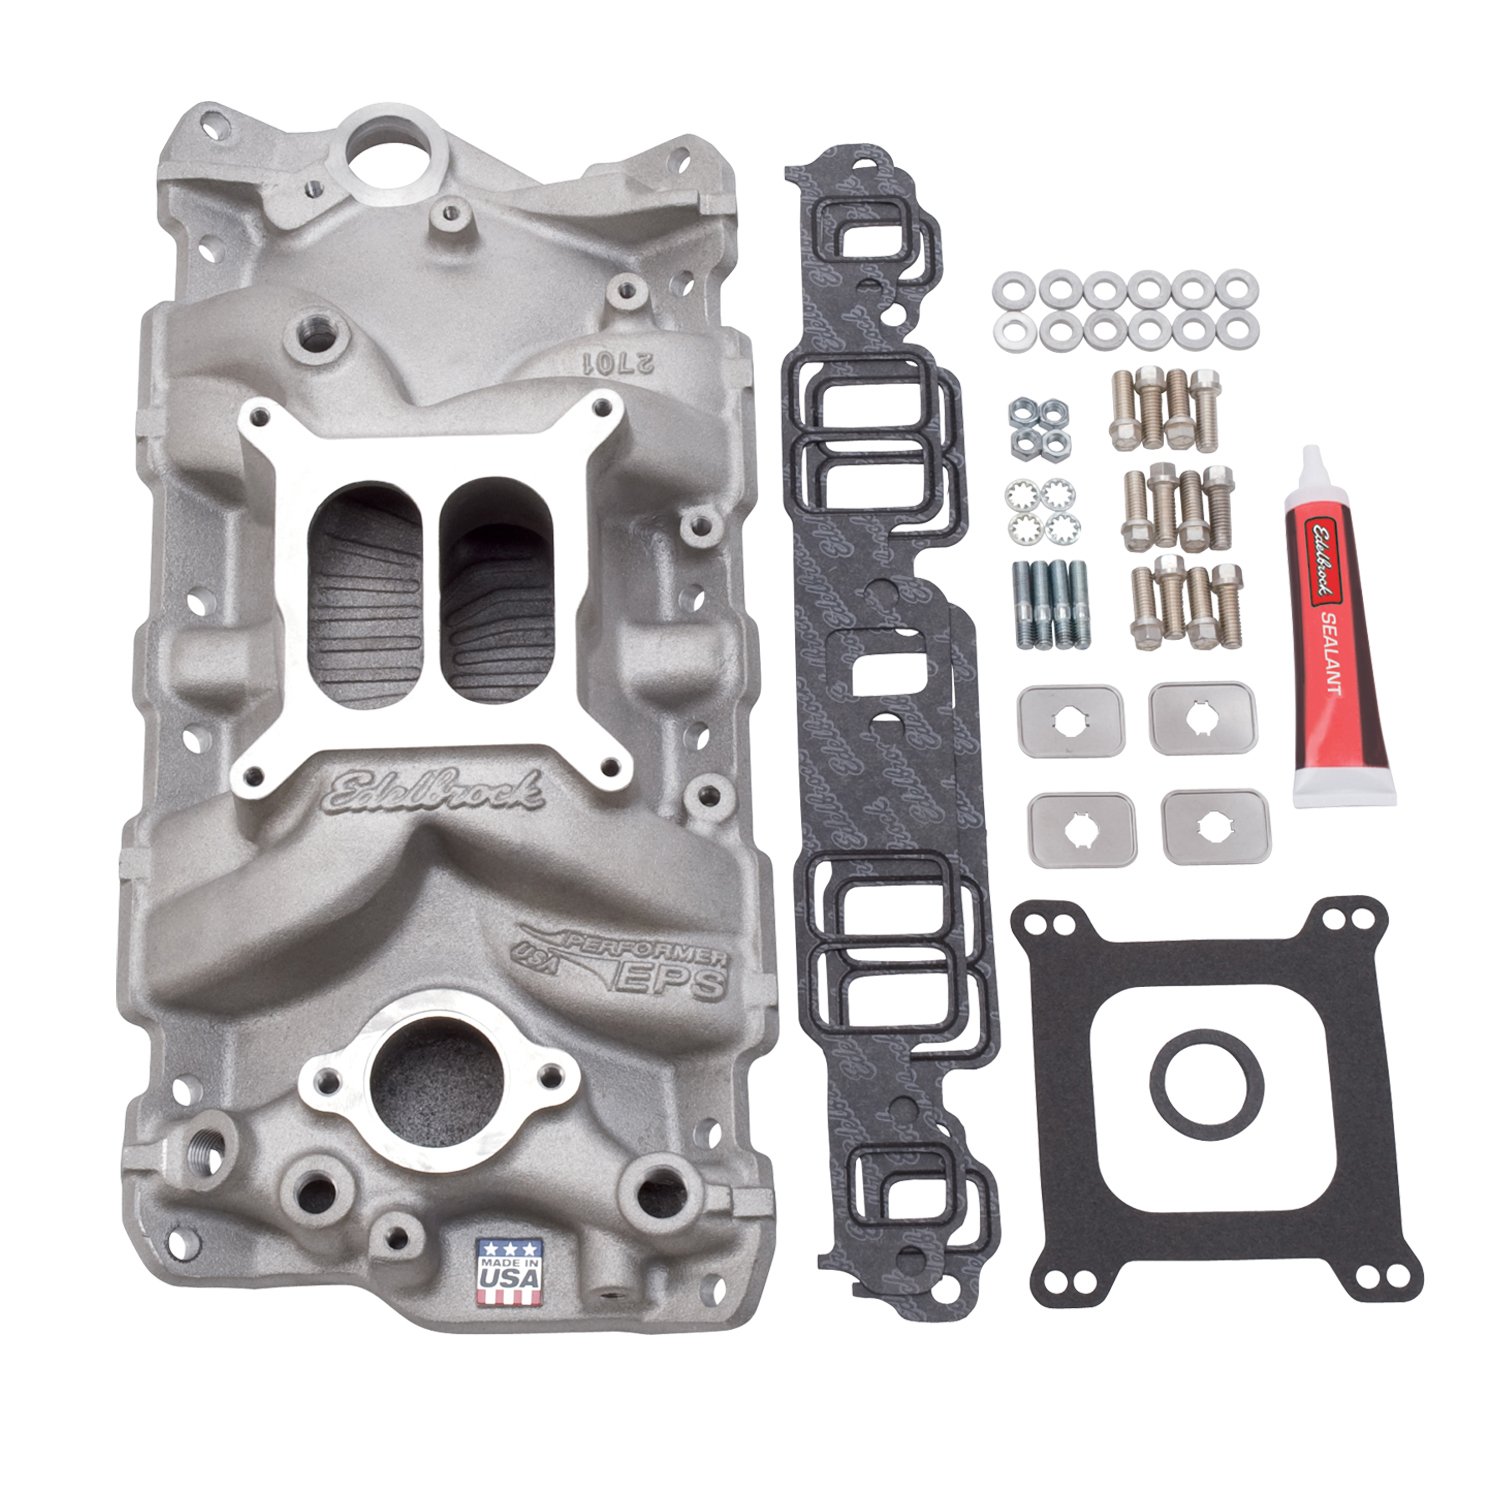 2040 Performer EPS Intake Manifold Installation Kit for 1957-1986 Small Block Chevy 262-400ci